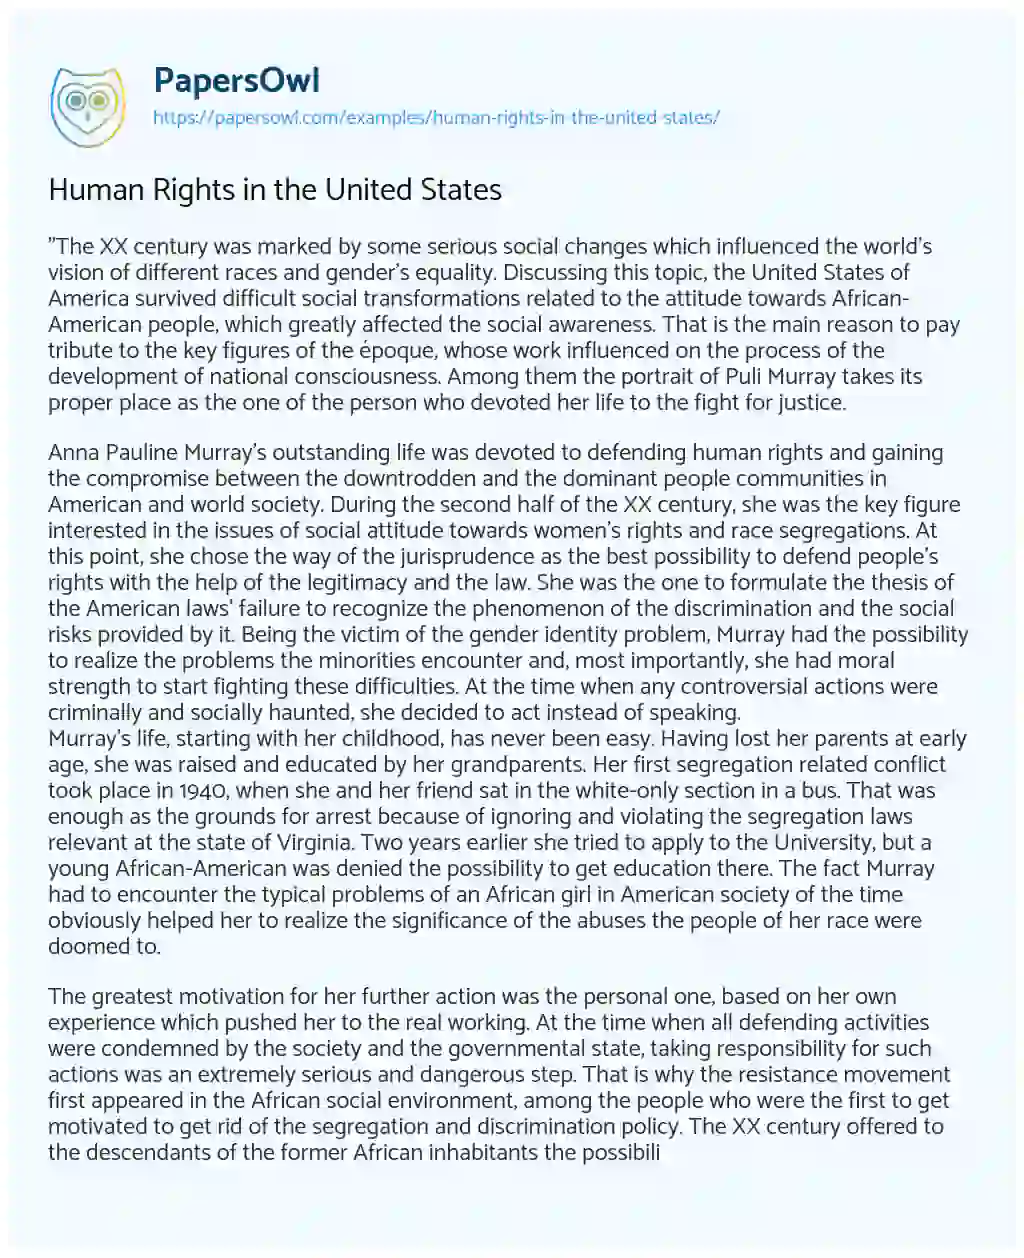 Human Rights in the United States essay